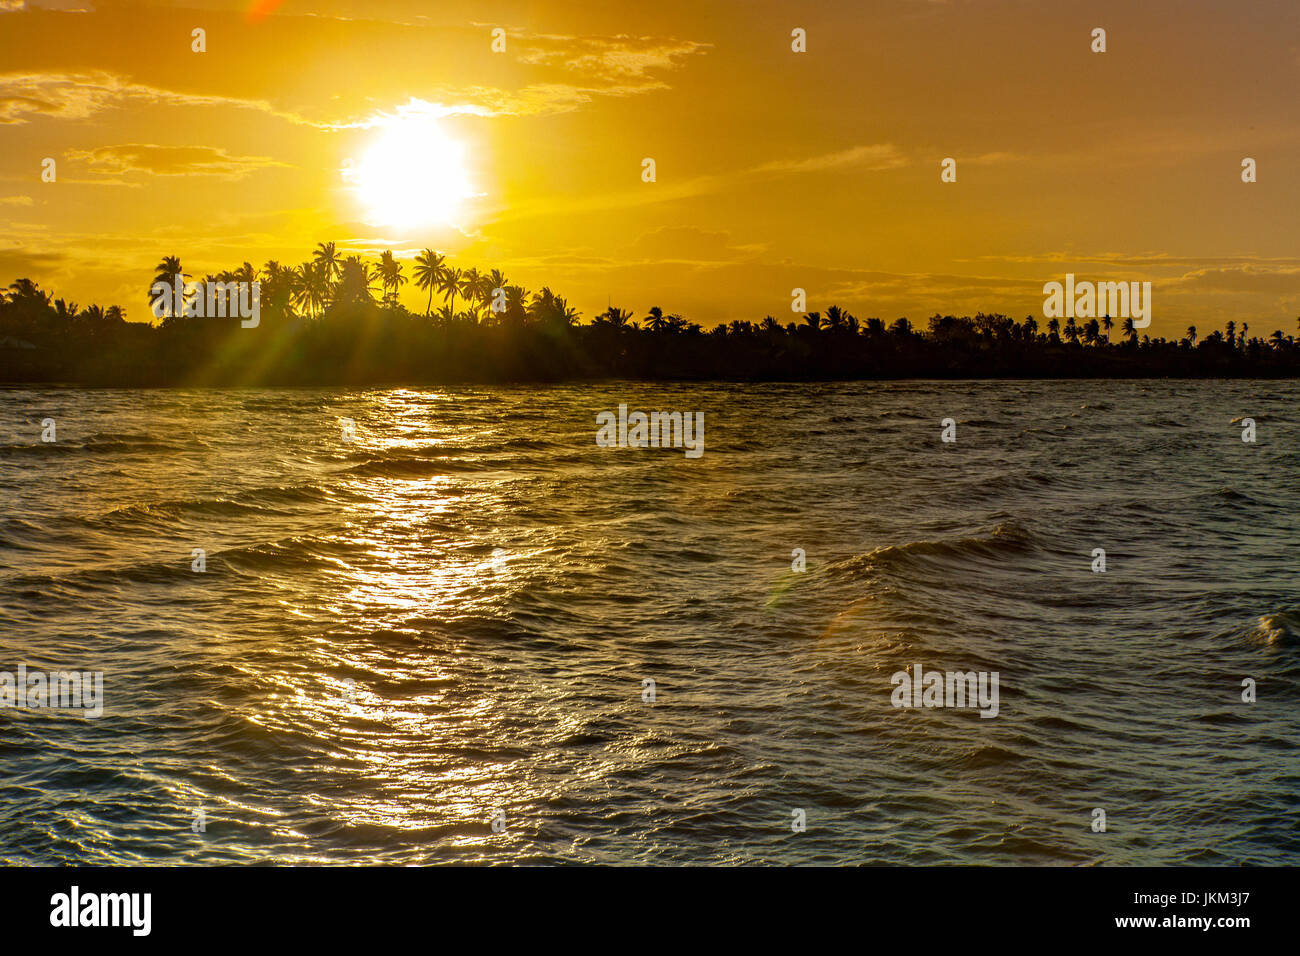 Sun setting behind a line of coconut palms in Cadiz City, Negros Occidental Island, Philippines. Stock Photo